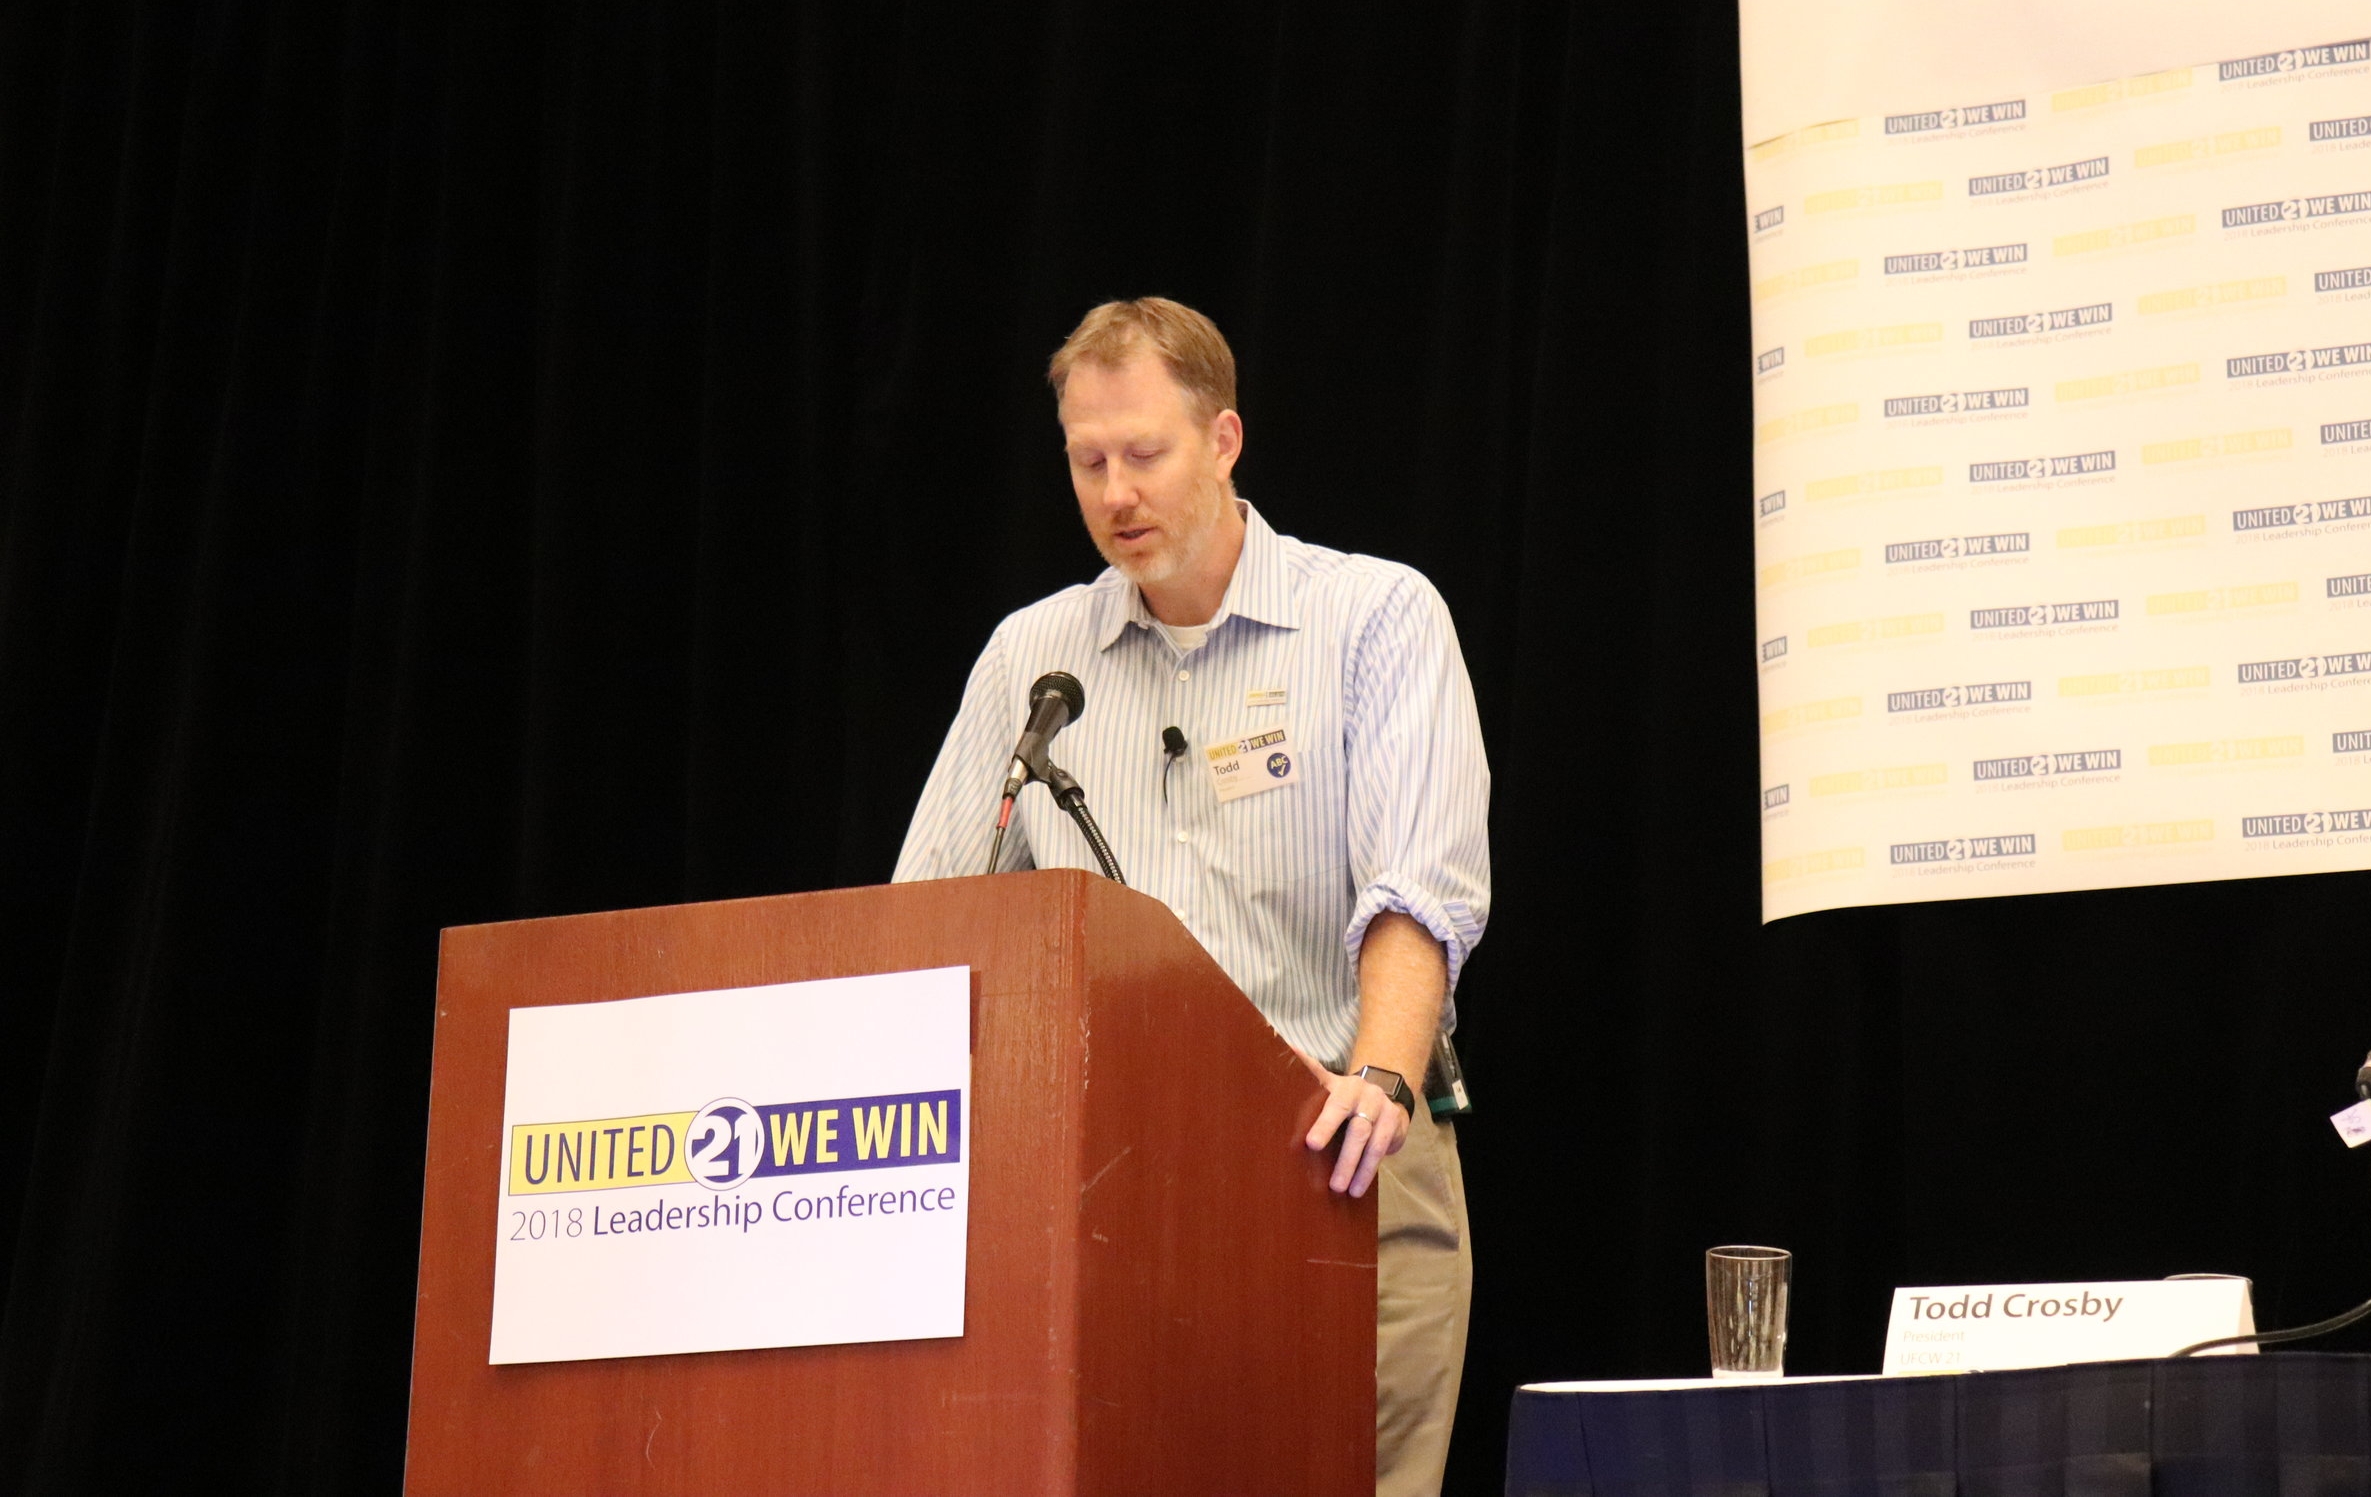 UFCW21 President Todd Crosby welcomes members and gives opening remarks.  